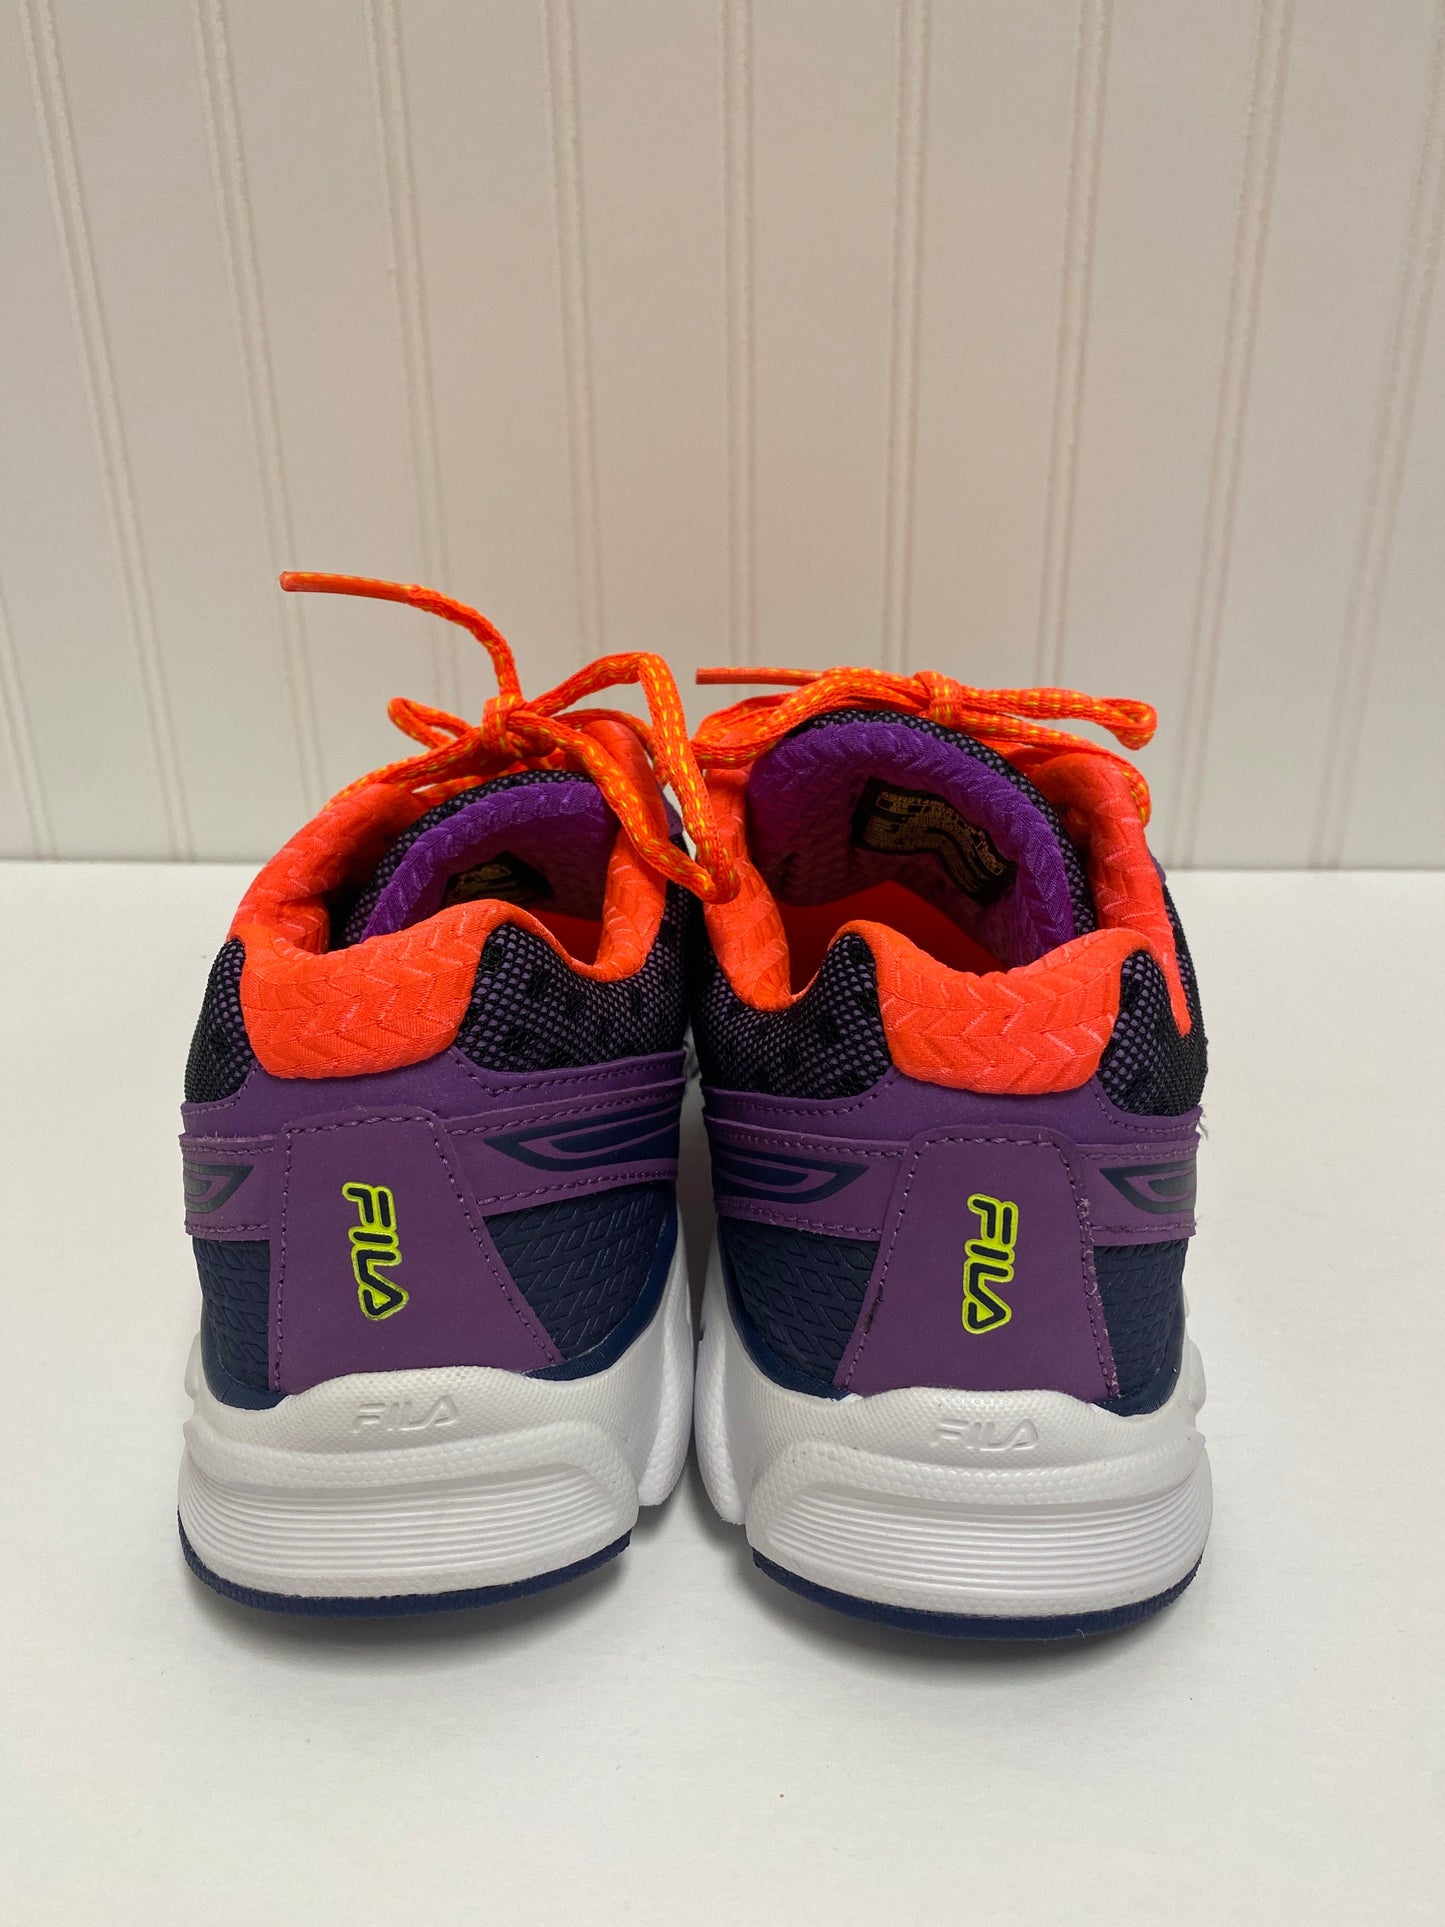 Shoes Sneakers By Fila  Size: 8.5